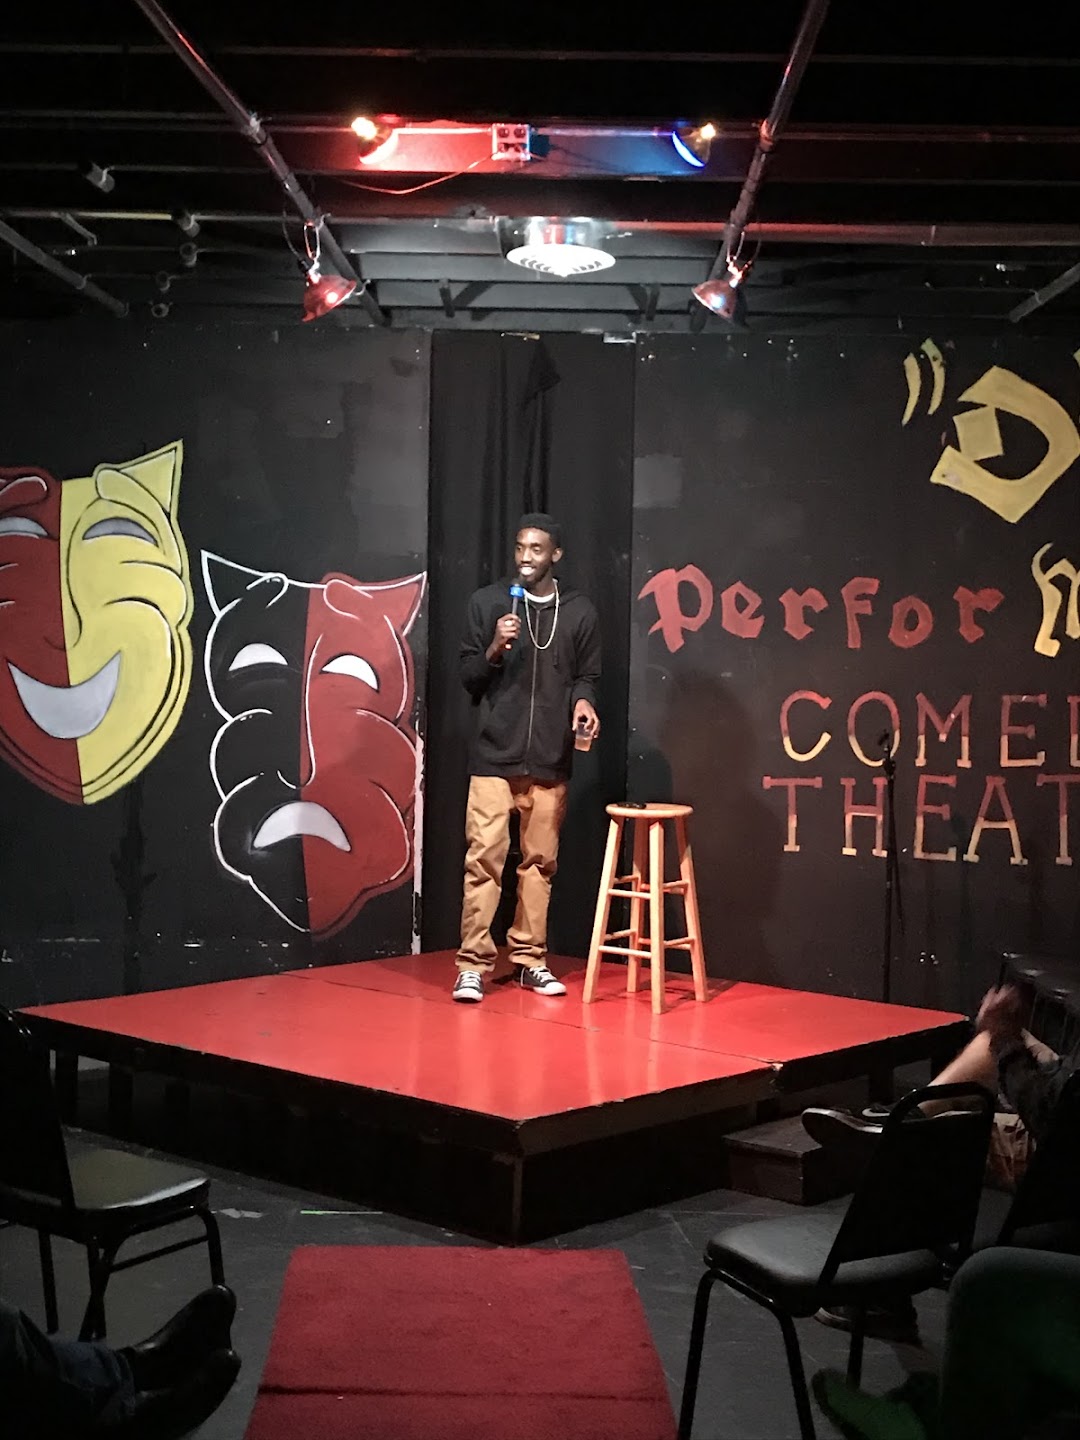 D Performance Comedy Theater